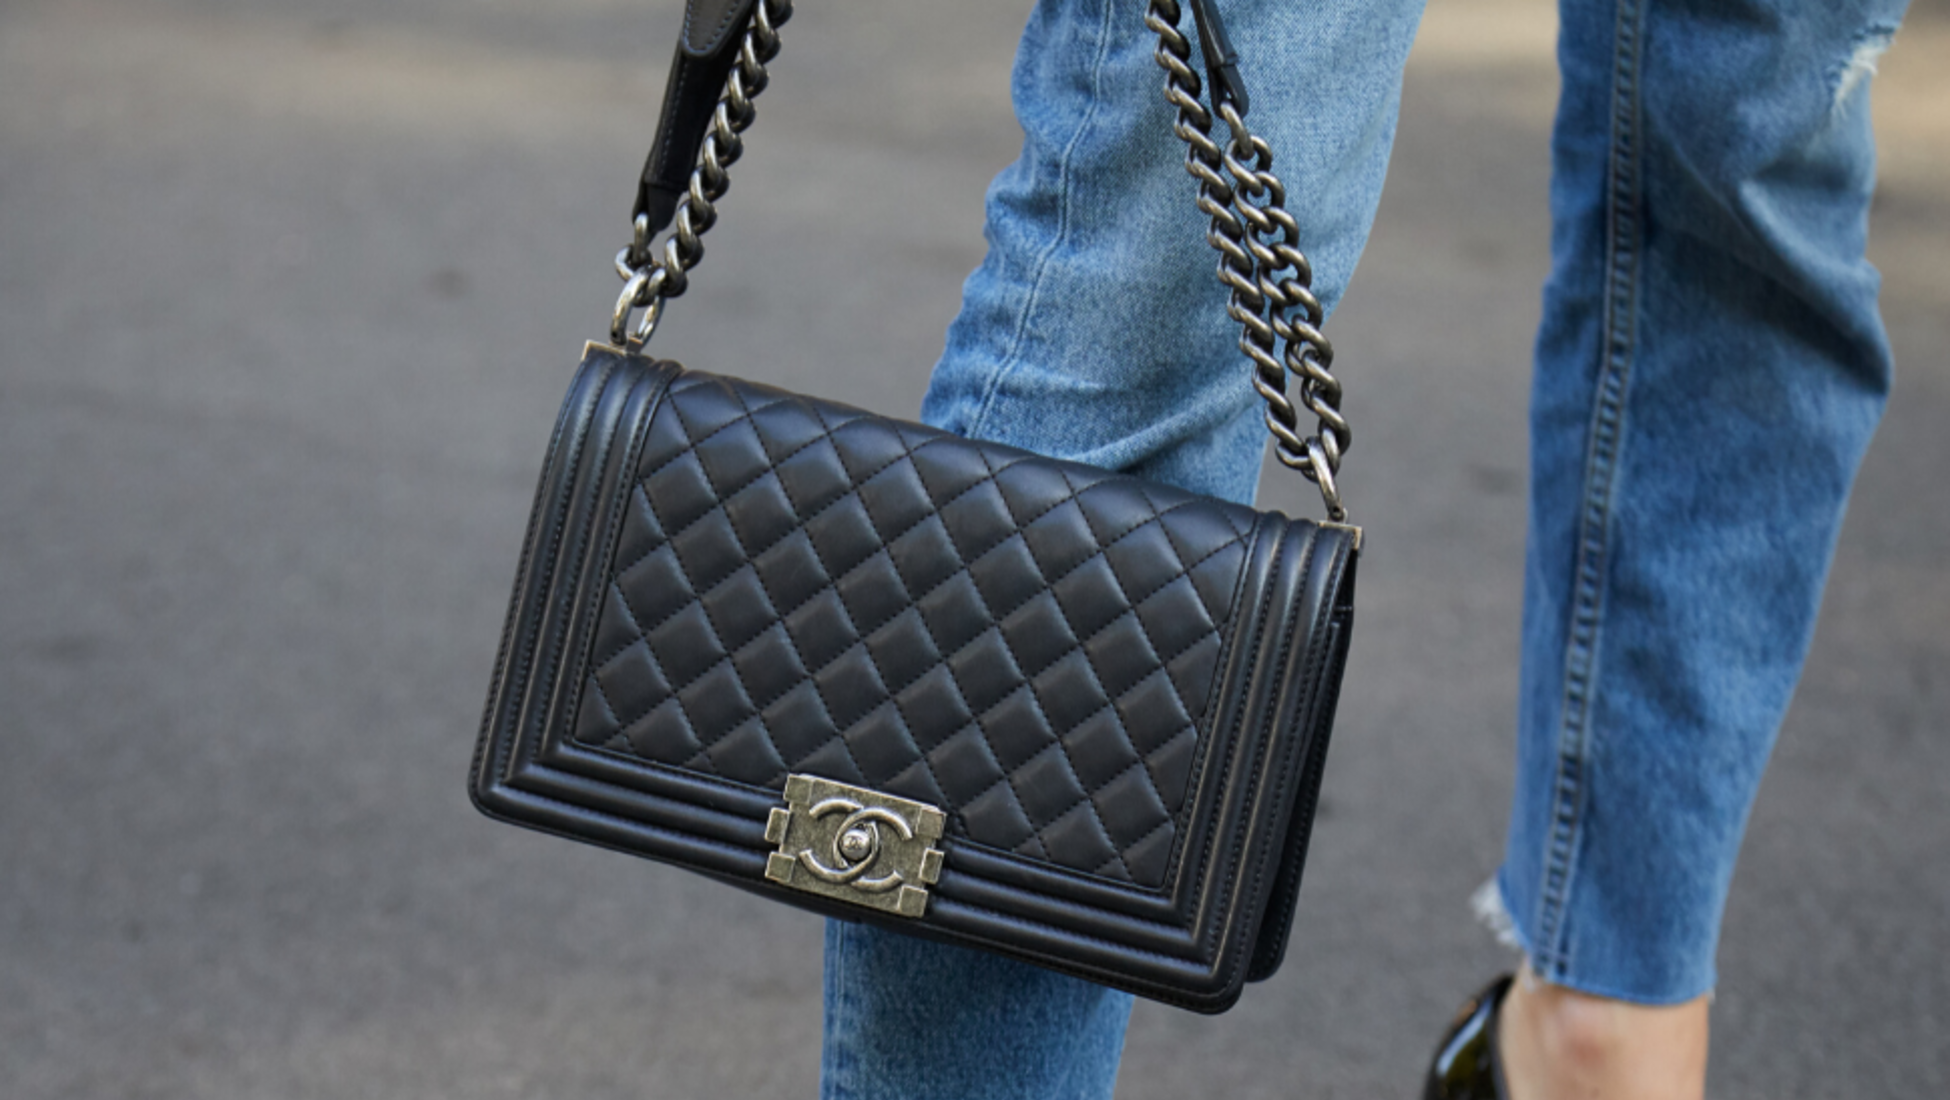 How to spot a fake Chanel bag - Catawiki